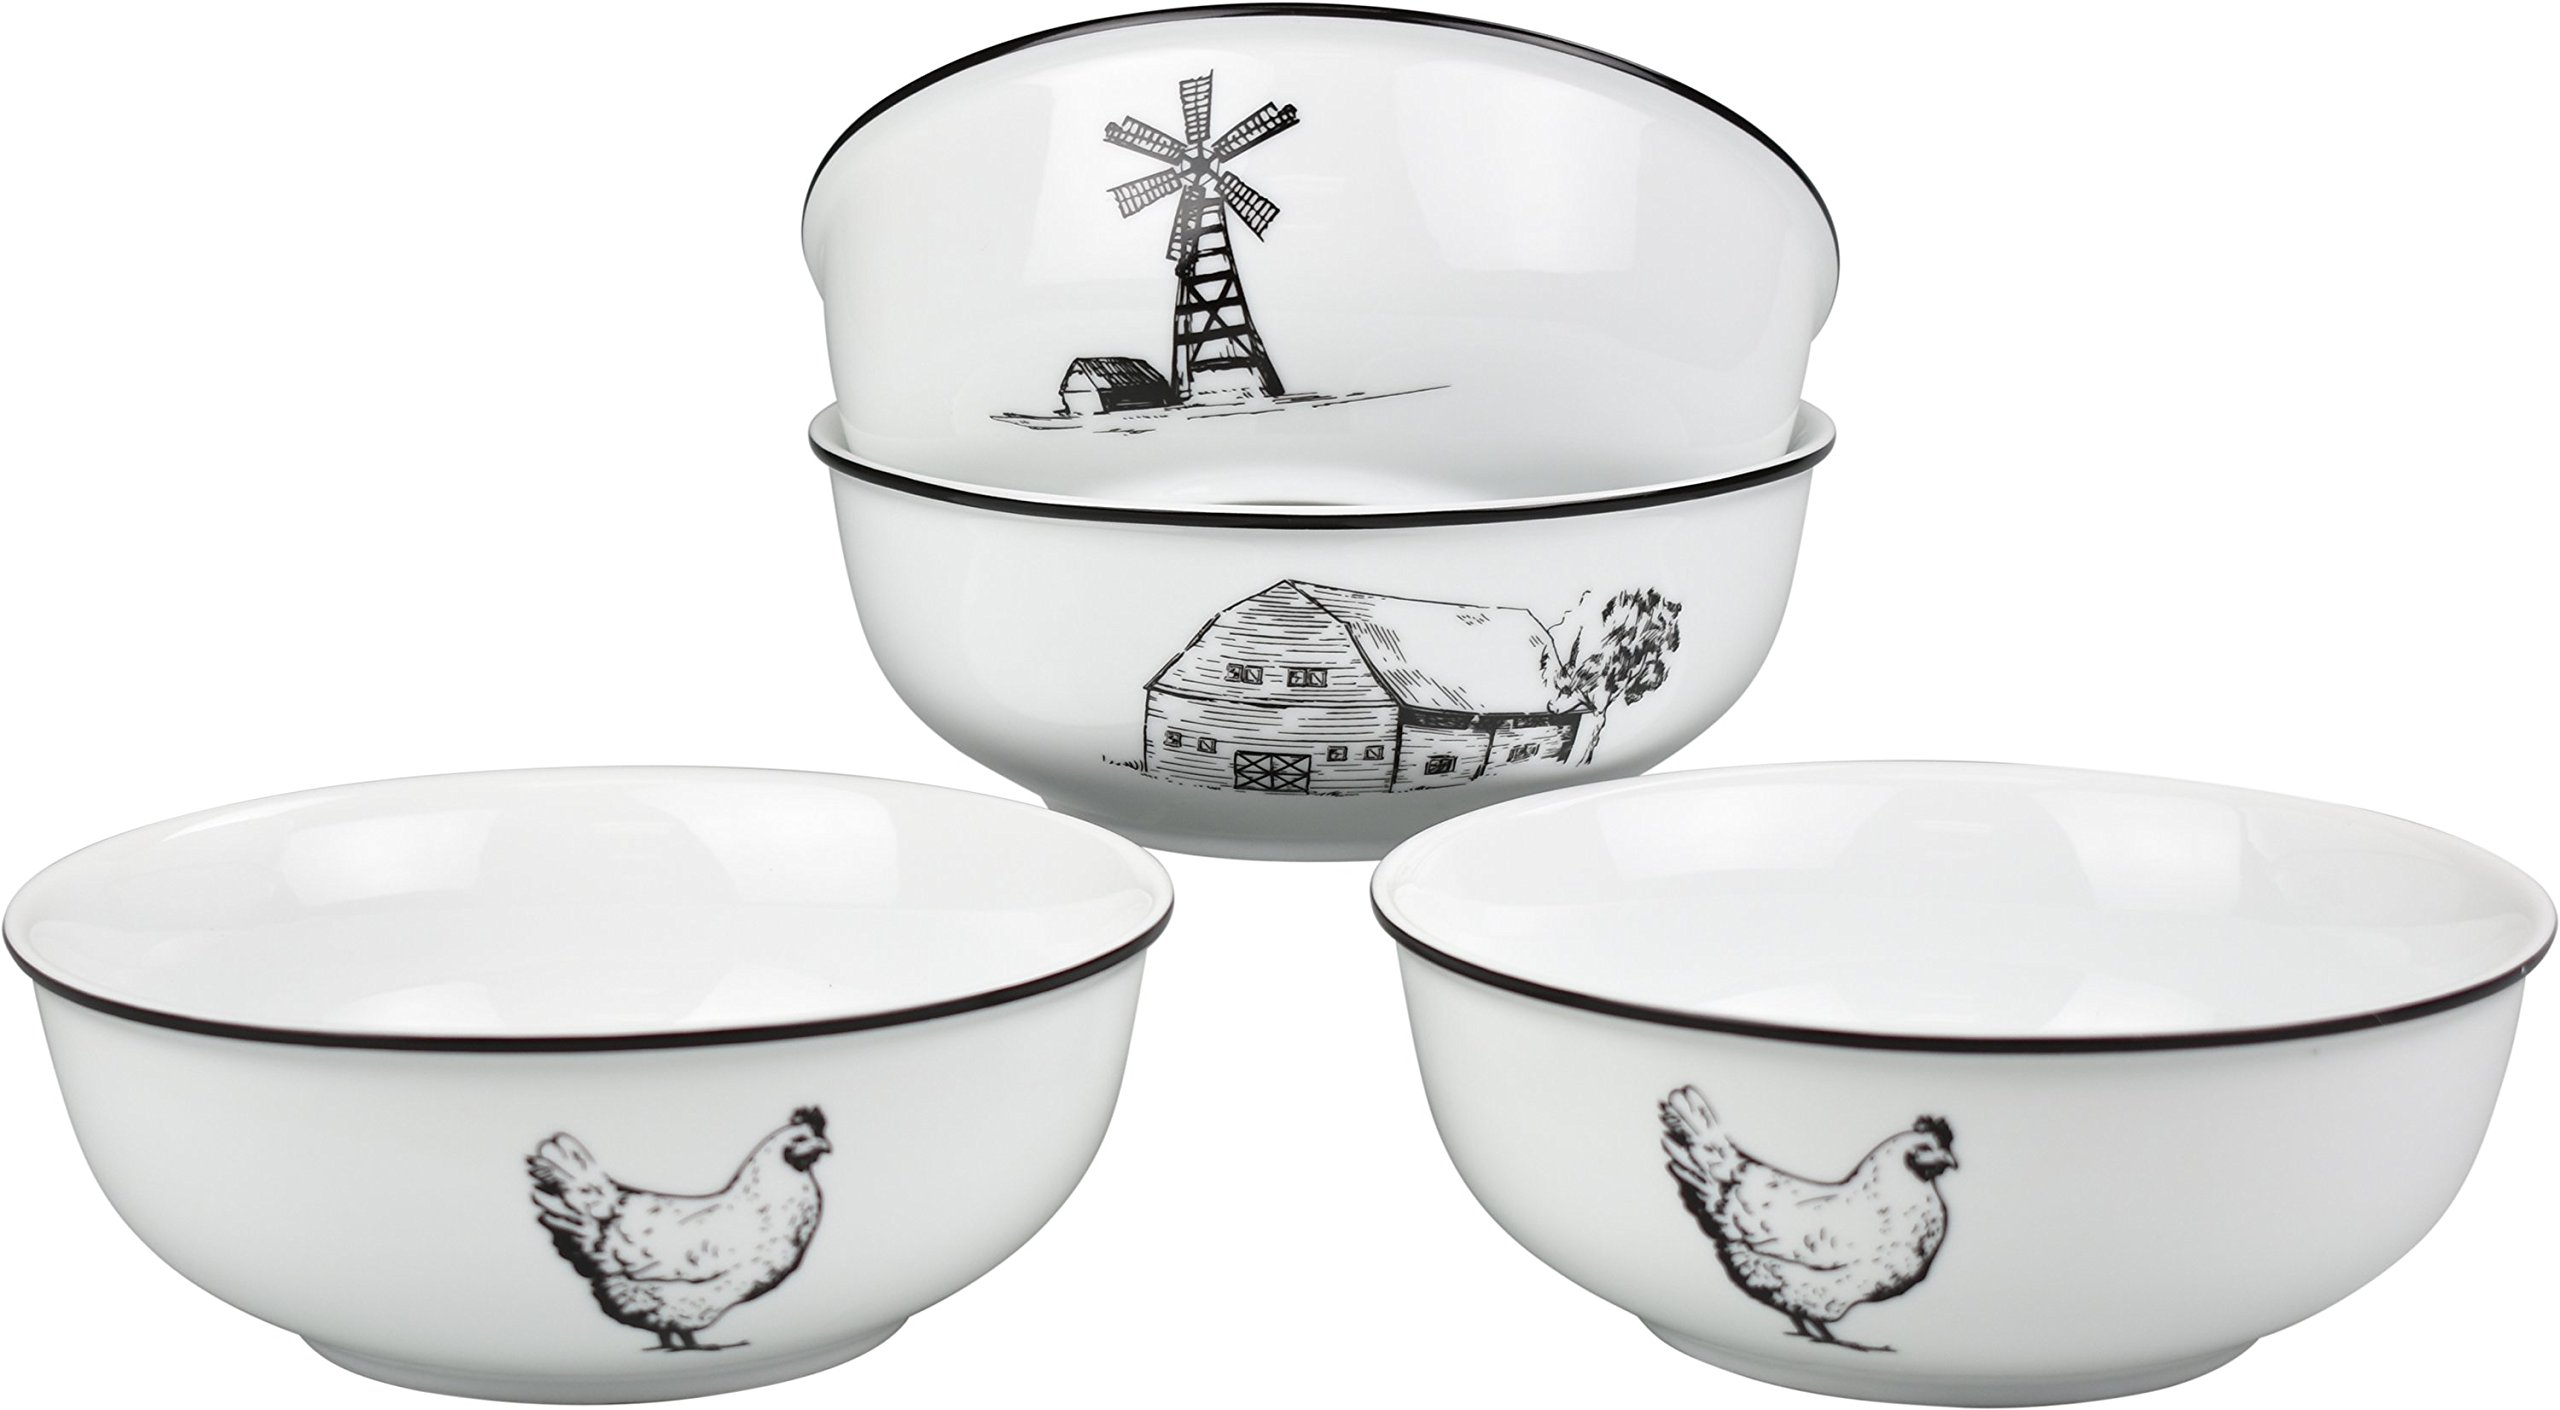 O-Ware White Porcelain Cereal Bowl with Assorted Farm Design, Set of 4